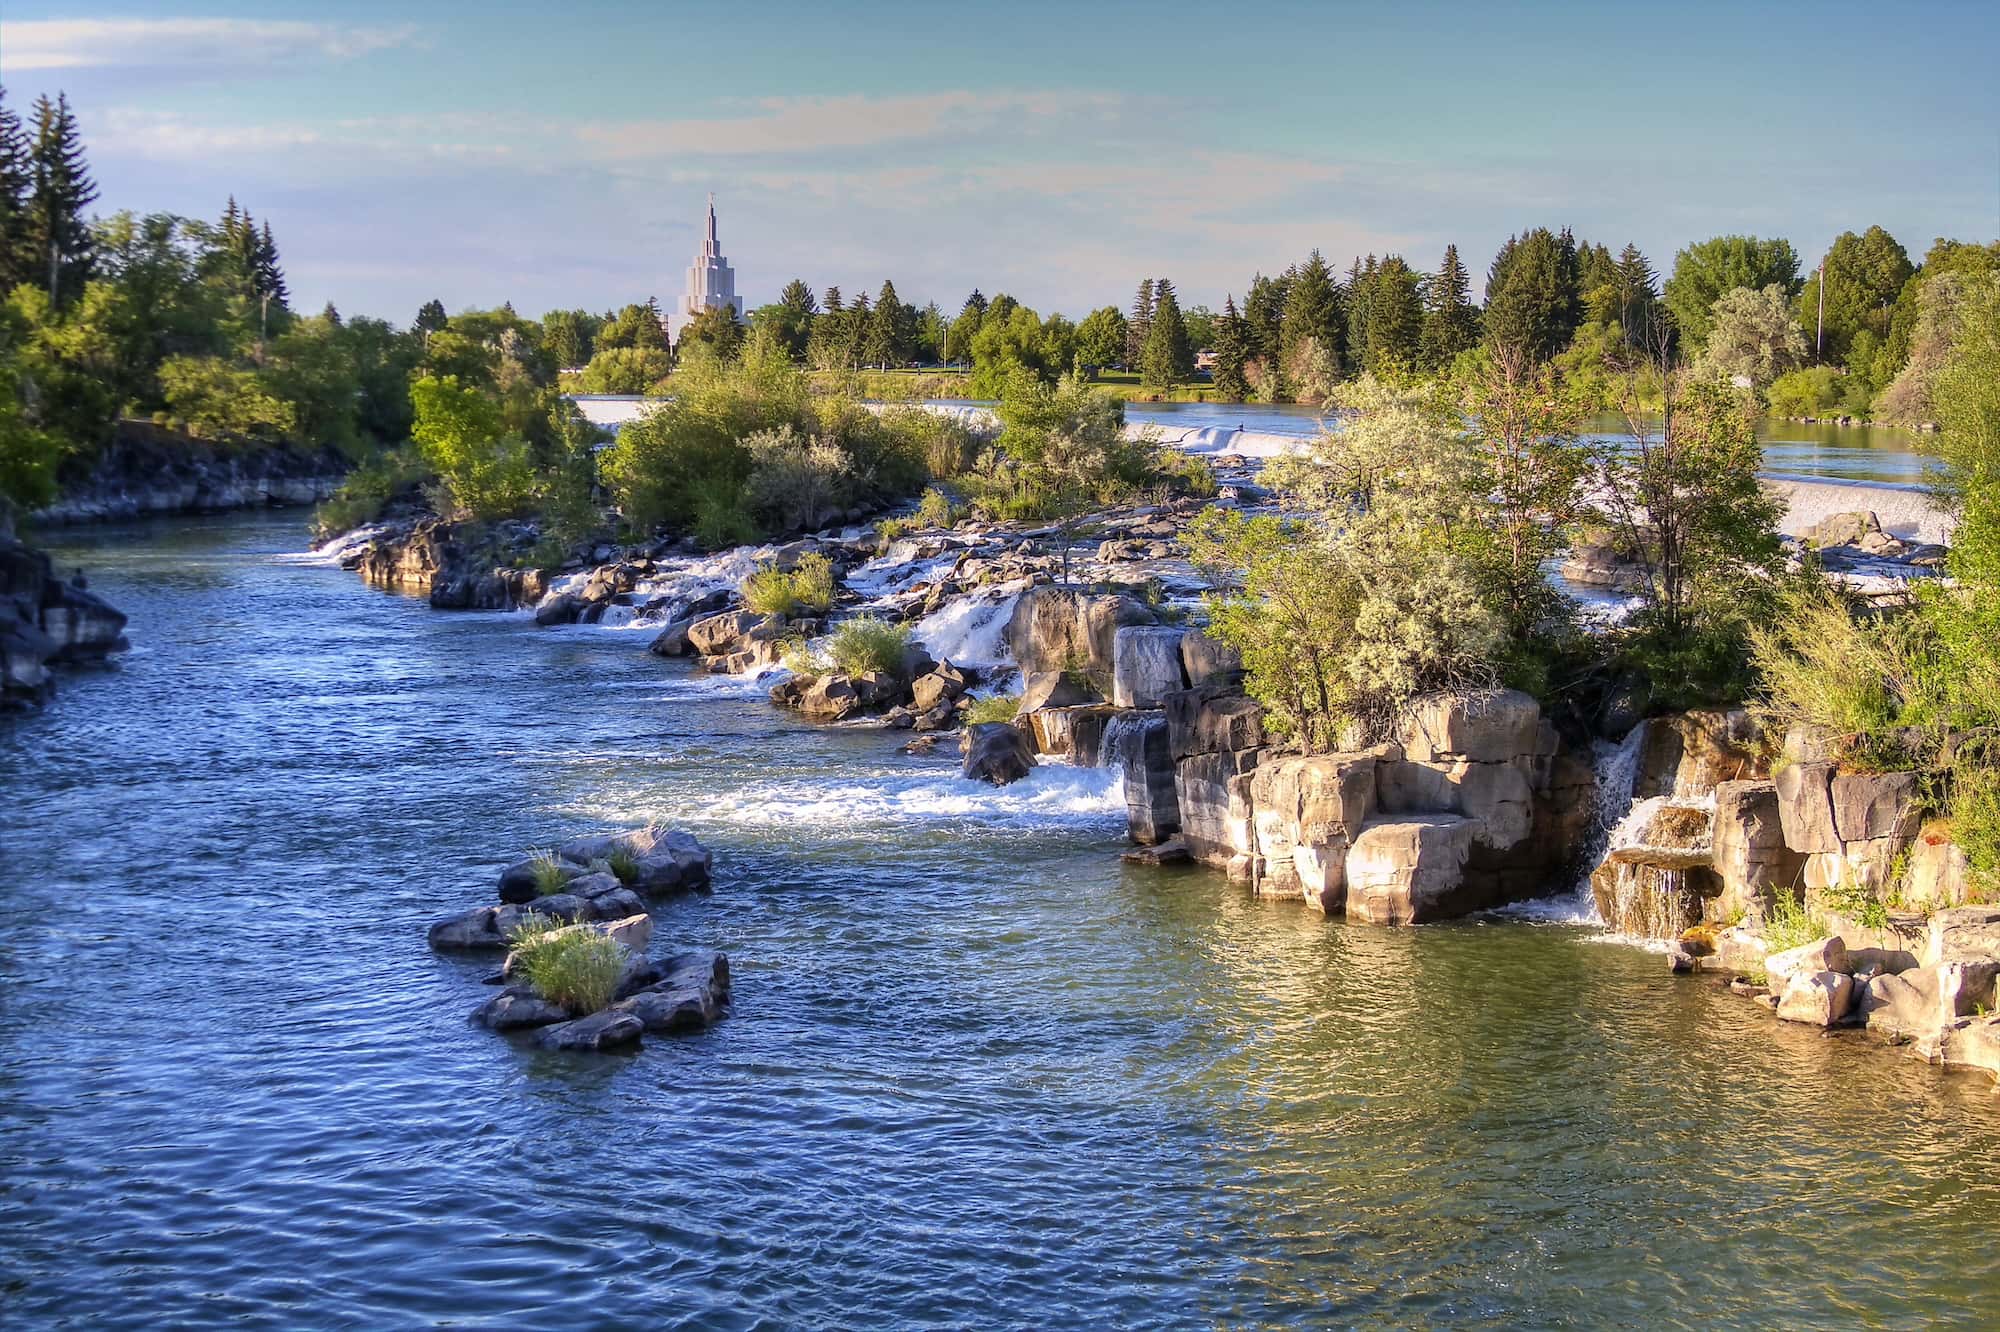 Find Adventure in Eastern Idaho at These 8 Idaho Falls Camping Sites